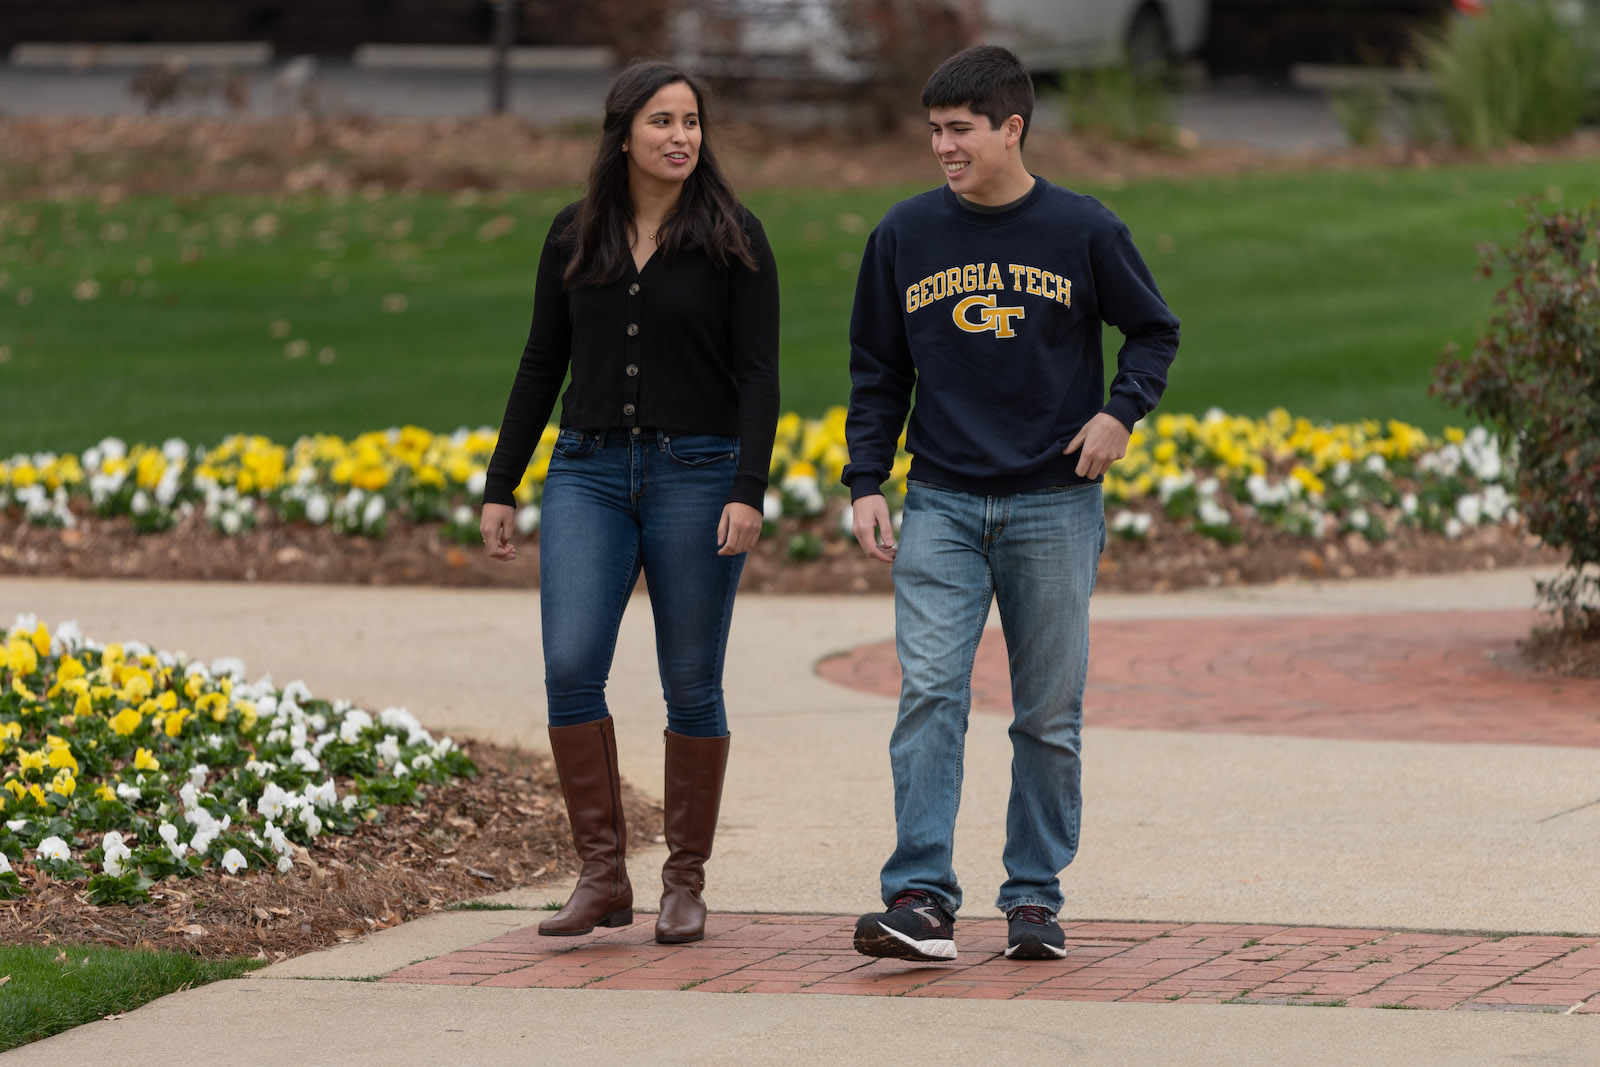 Isabella Sanders graduated with two master's degrees: one in operations research and another in geographic information science and technology. Her brother Eli graduated with a bachelor's in economics with a minor in history.